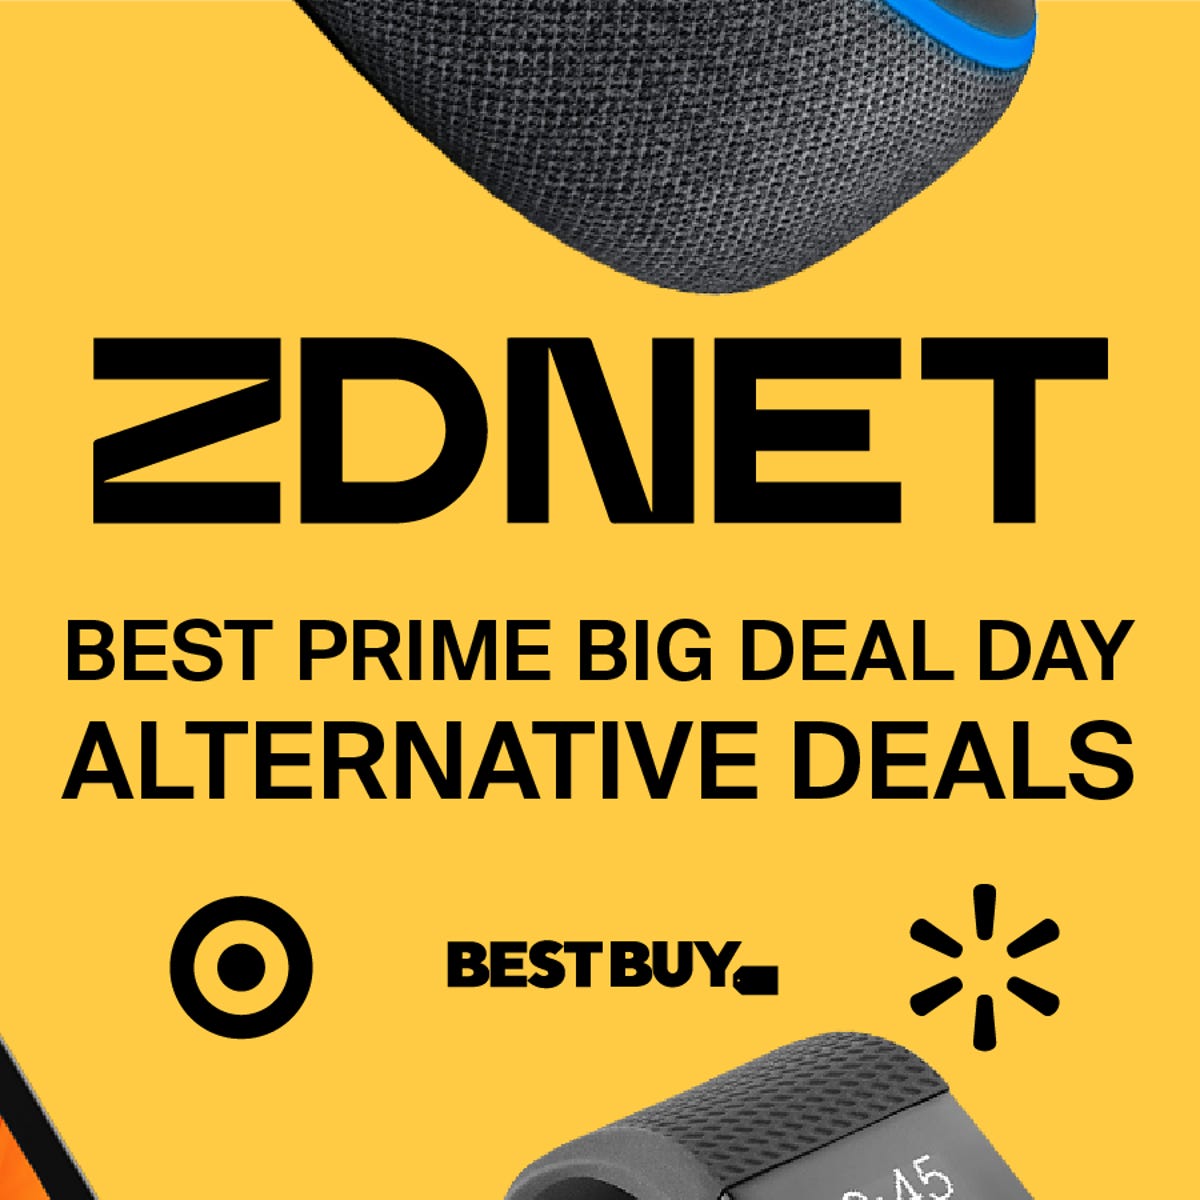 Deal of the Day: Electronics Deals - Best Buy